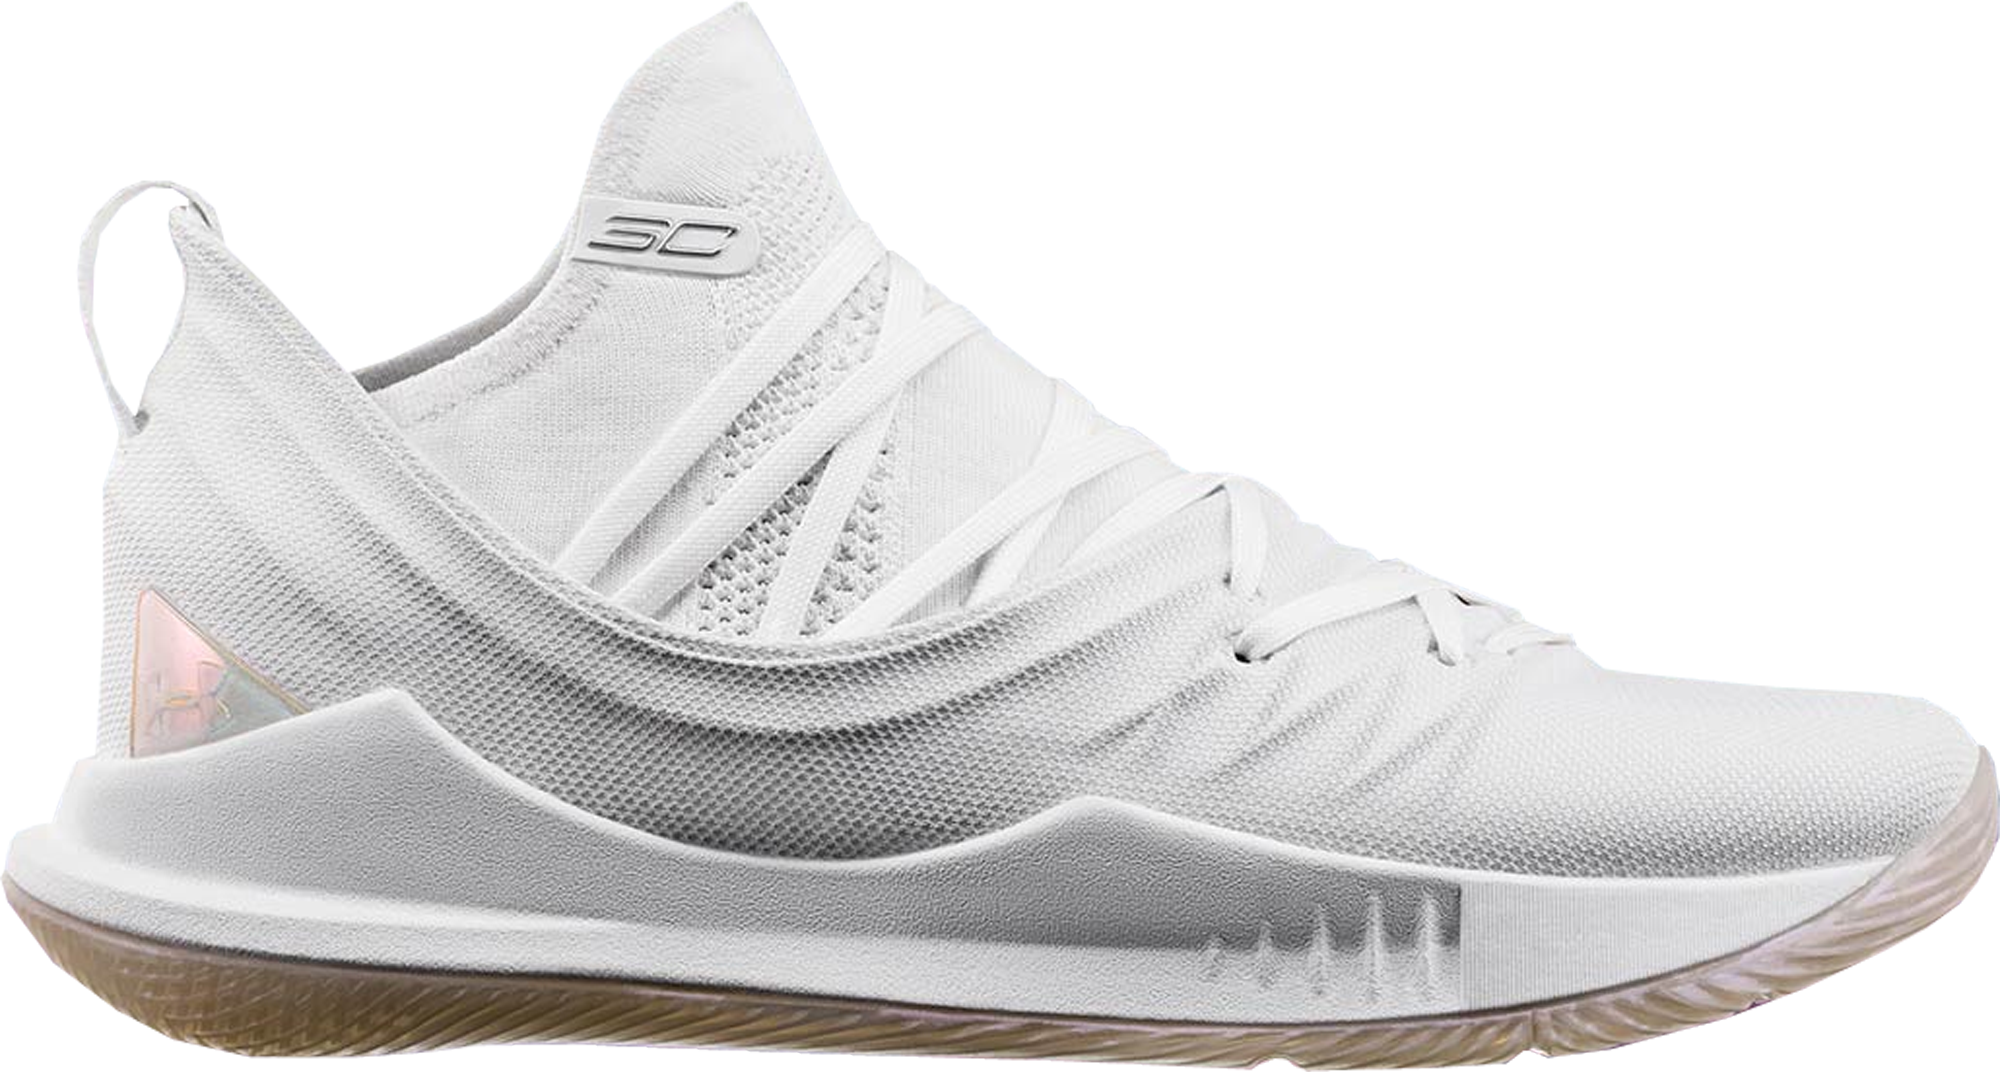 curry 5 shoes white